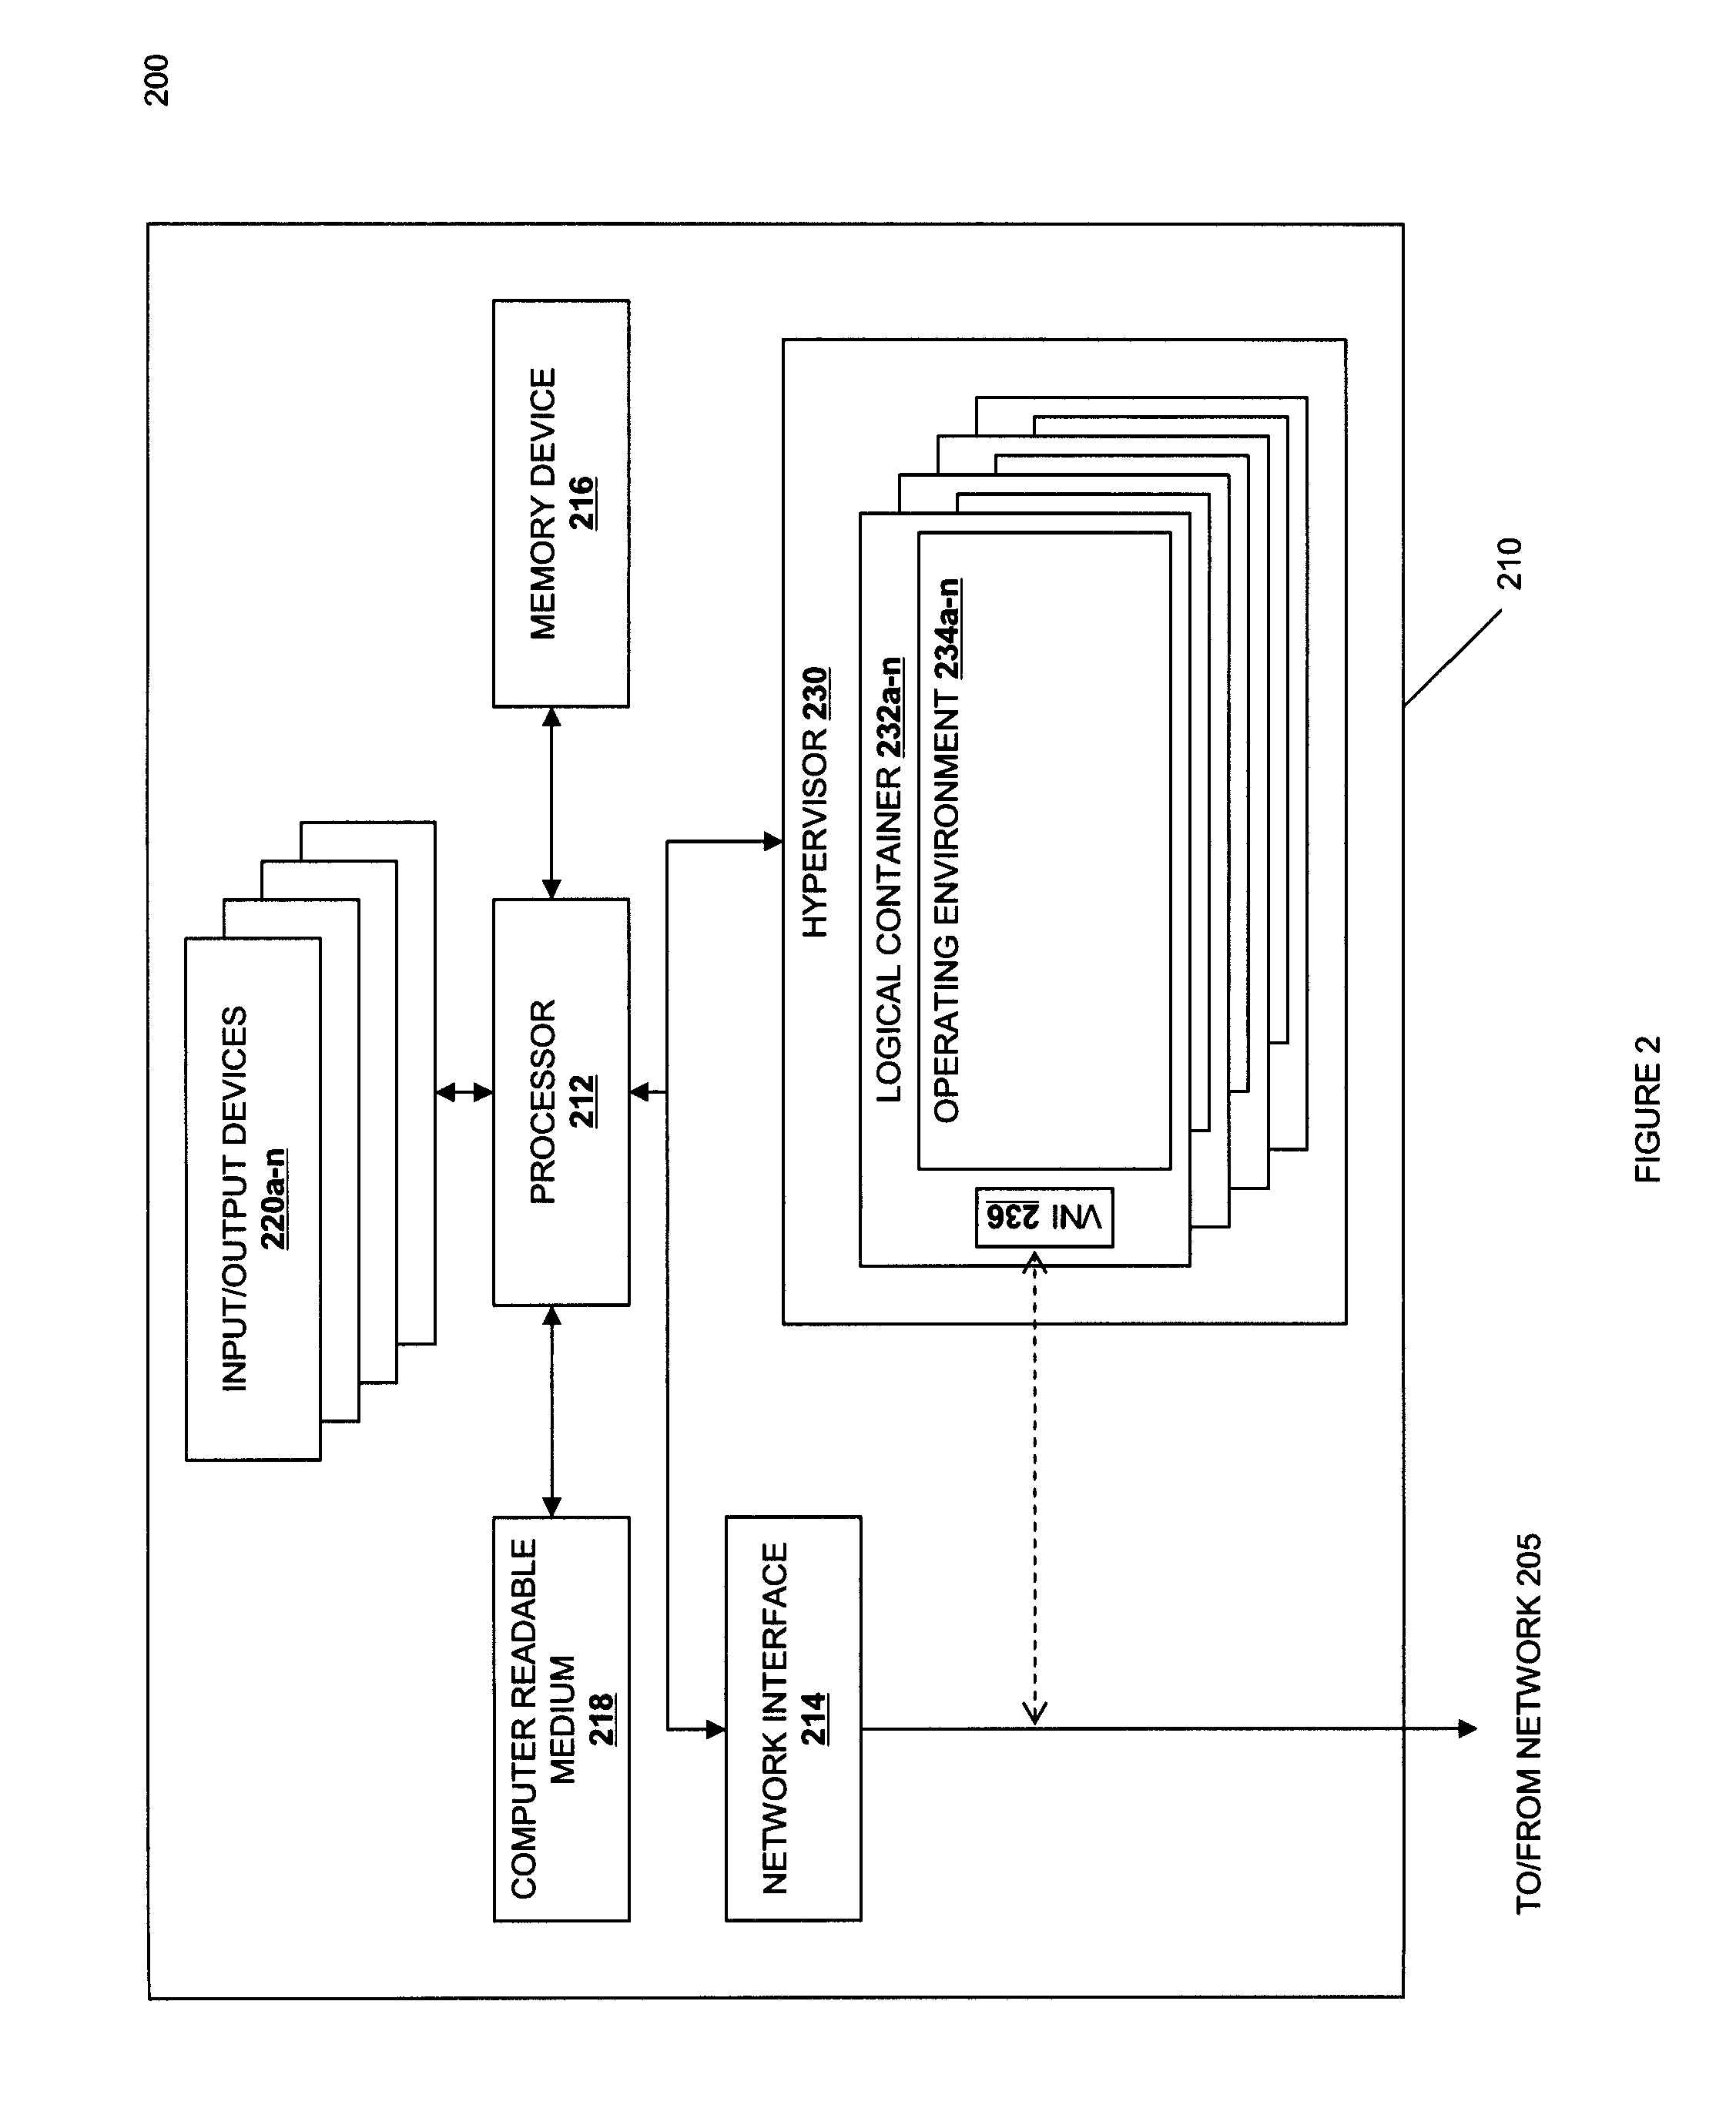 Method and System for Utilizing Spare Cloud Resources